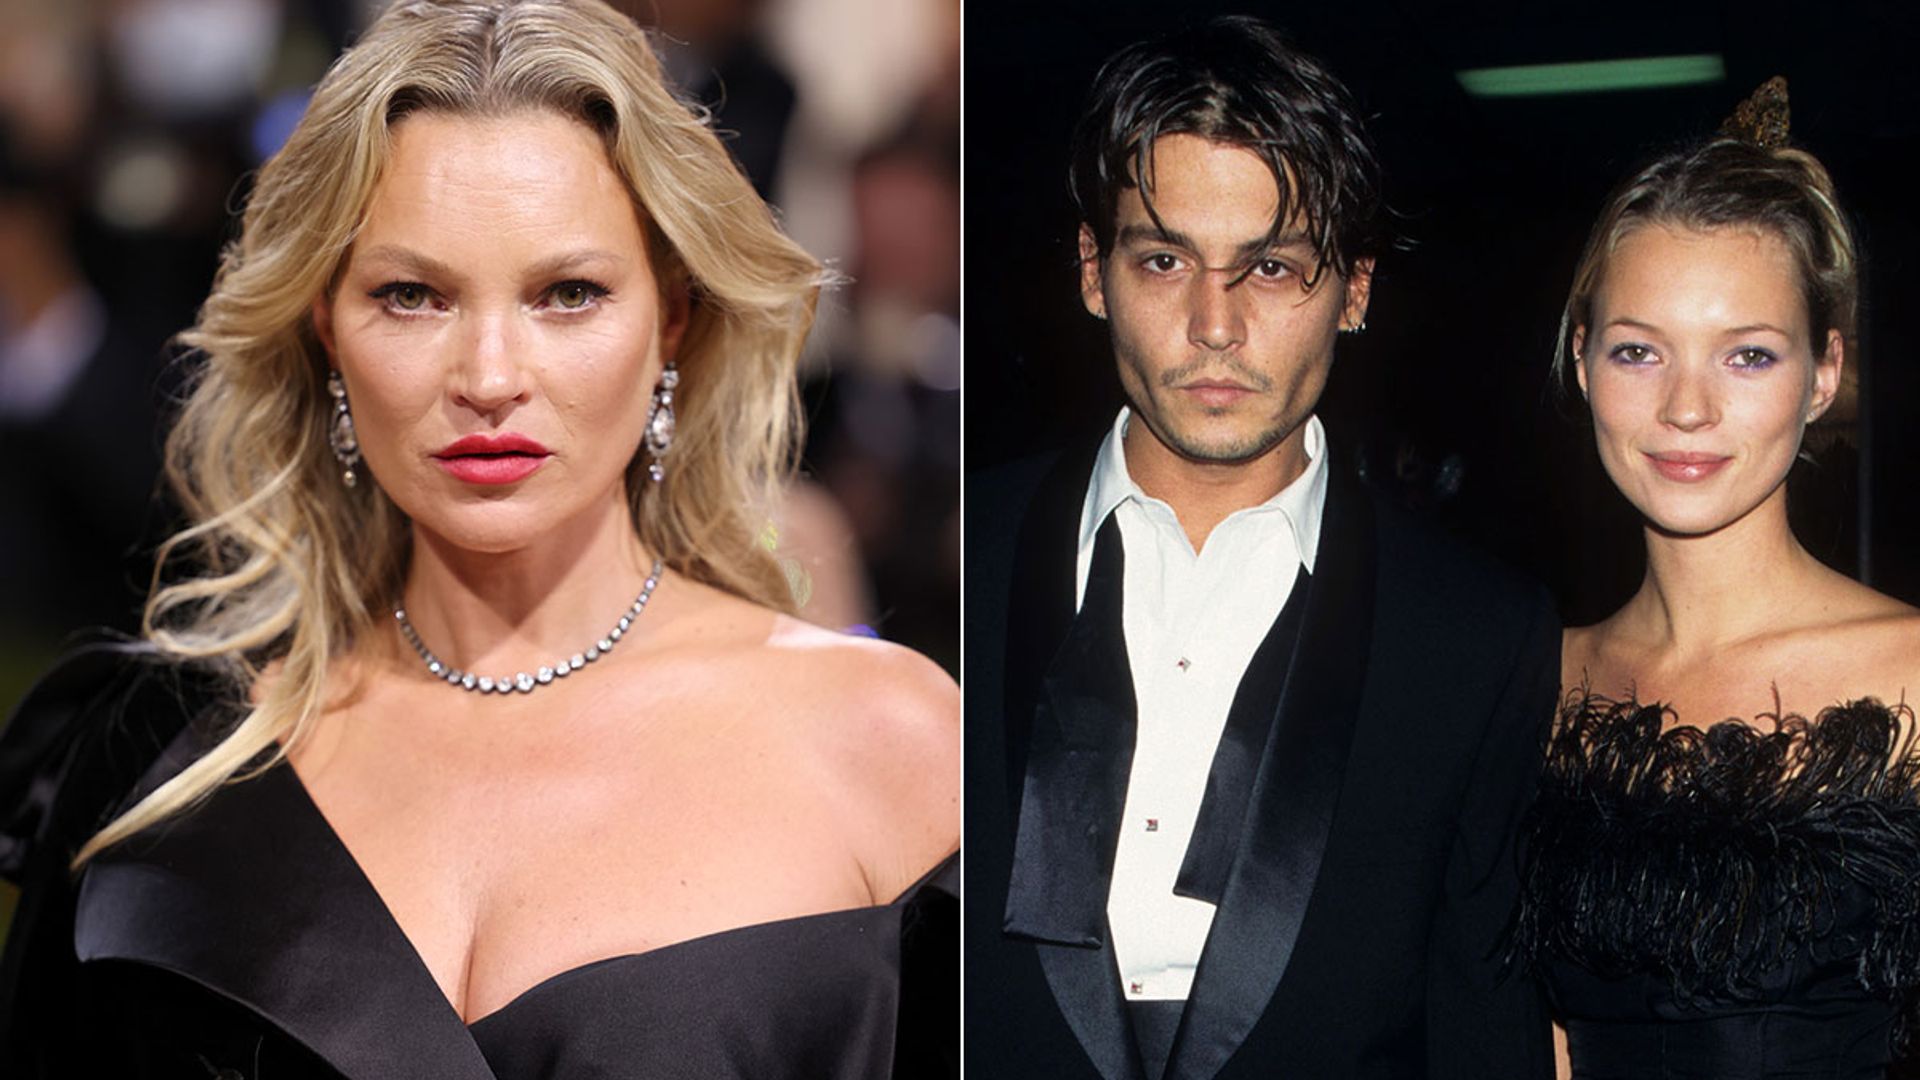 A look back at Kate Moss' dating history amid ex Johnny Depp's libel trial